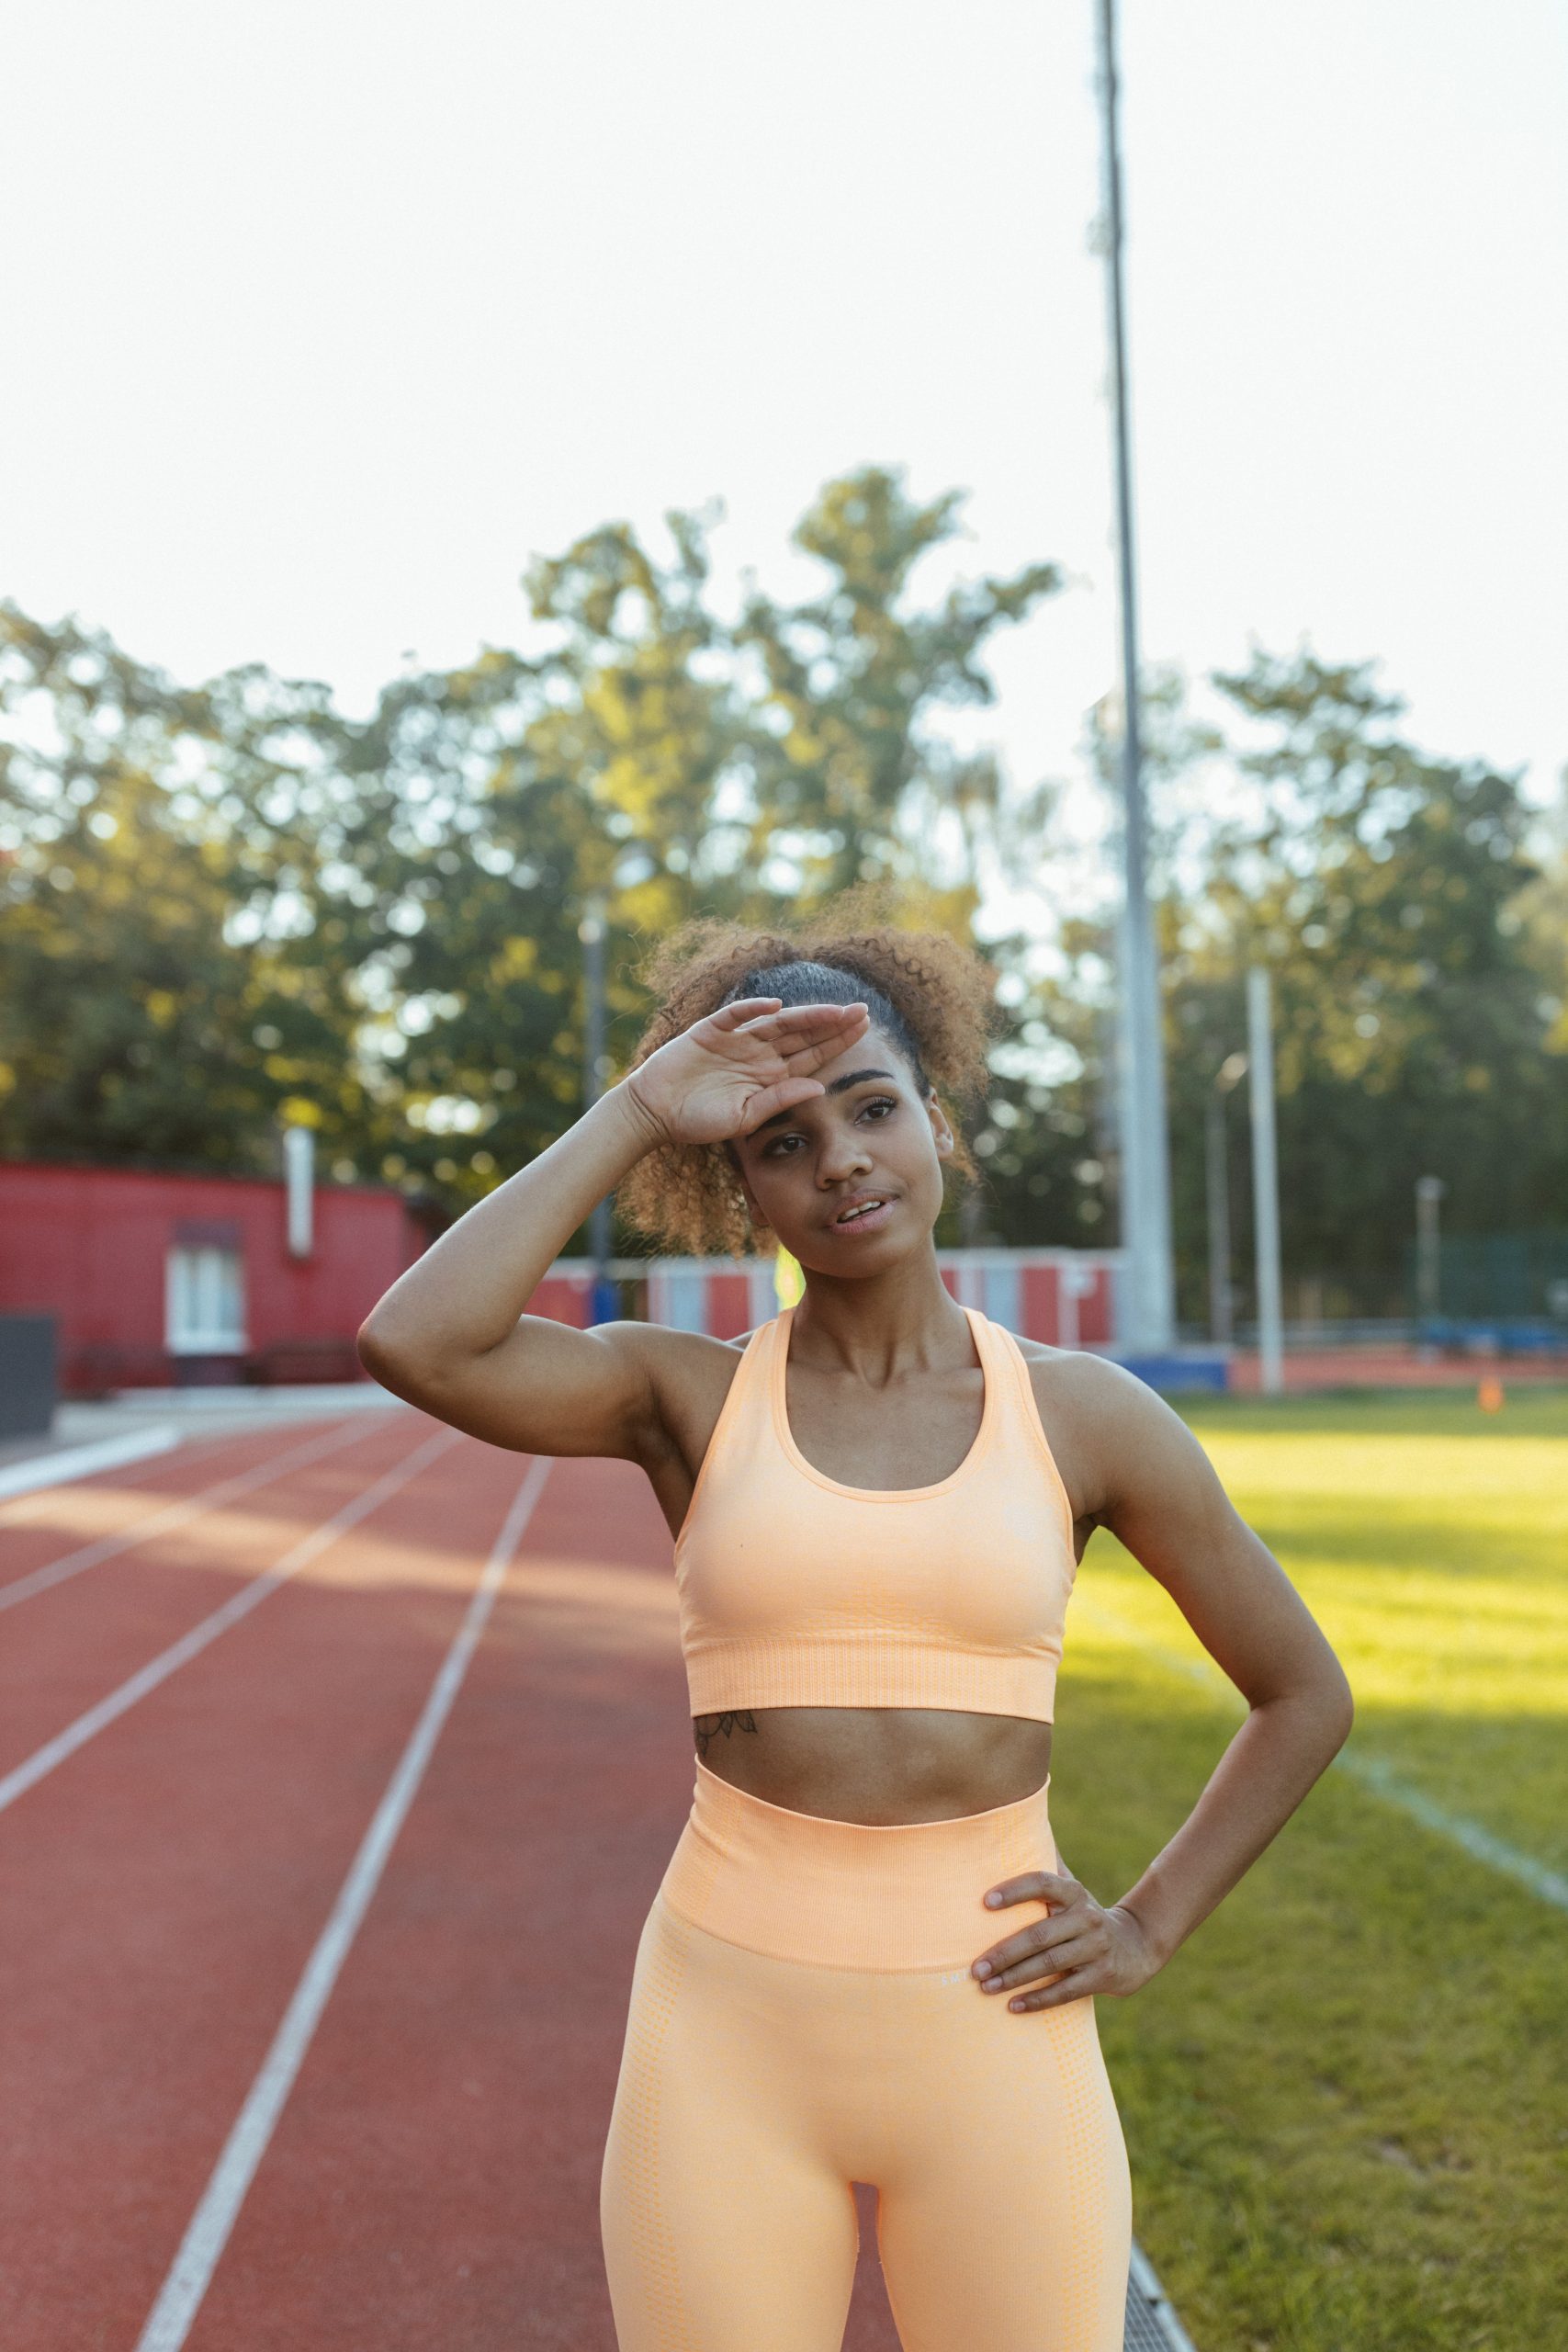 A female athlete in a peach sports outfit wiping sweat from her forehead on a sunny track field.